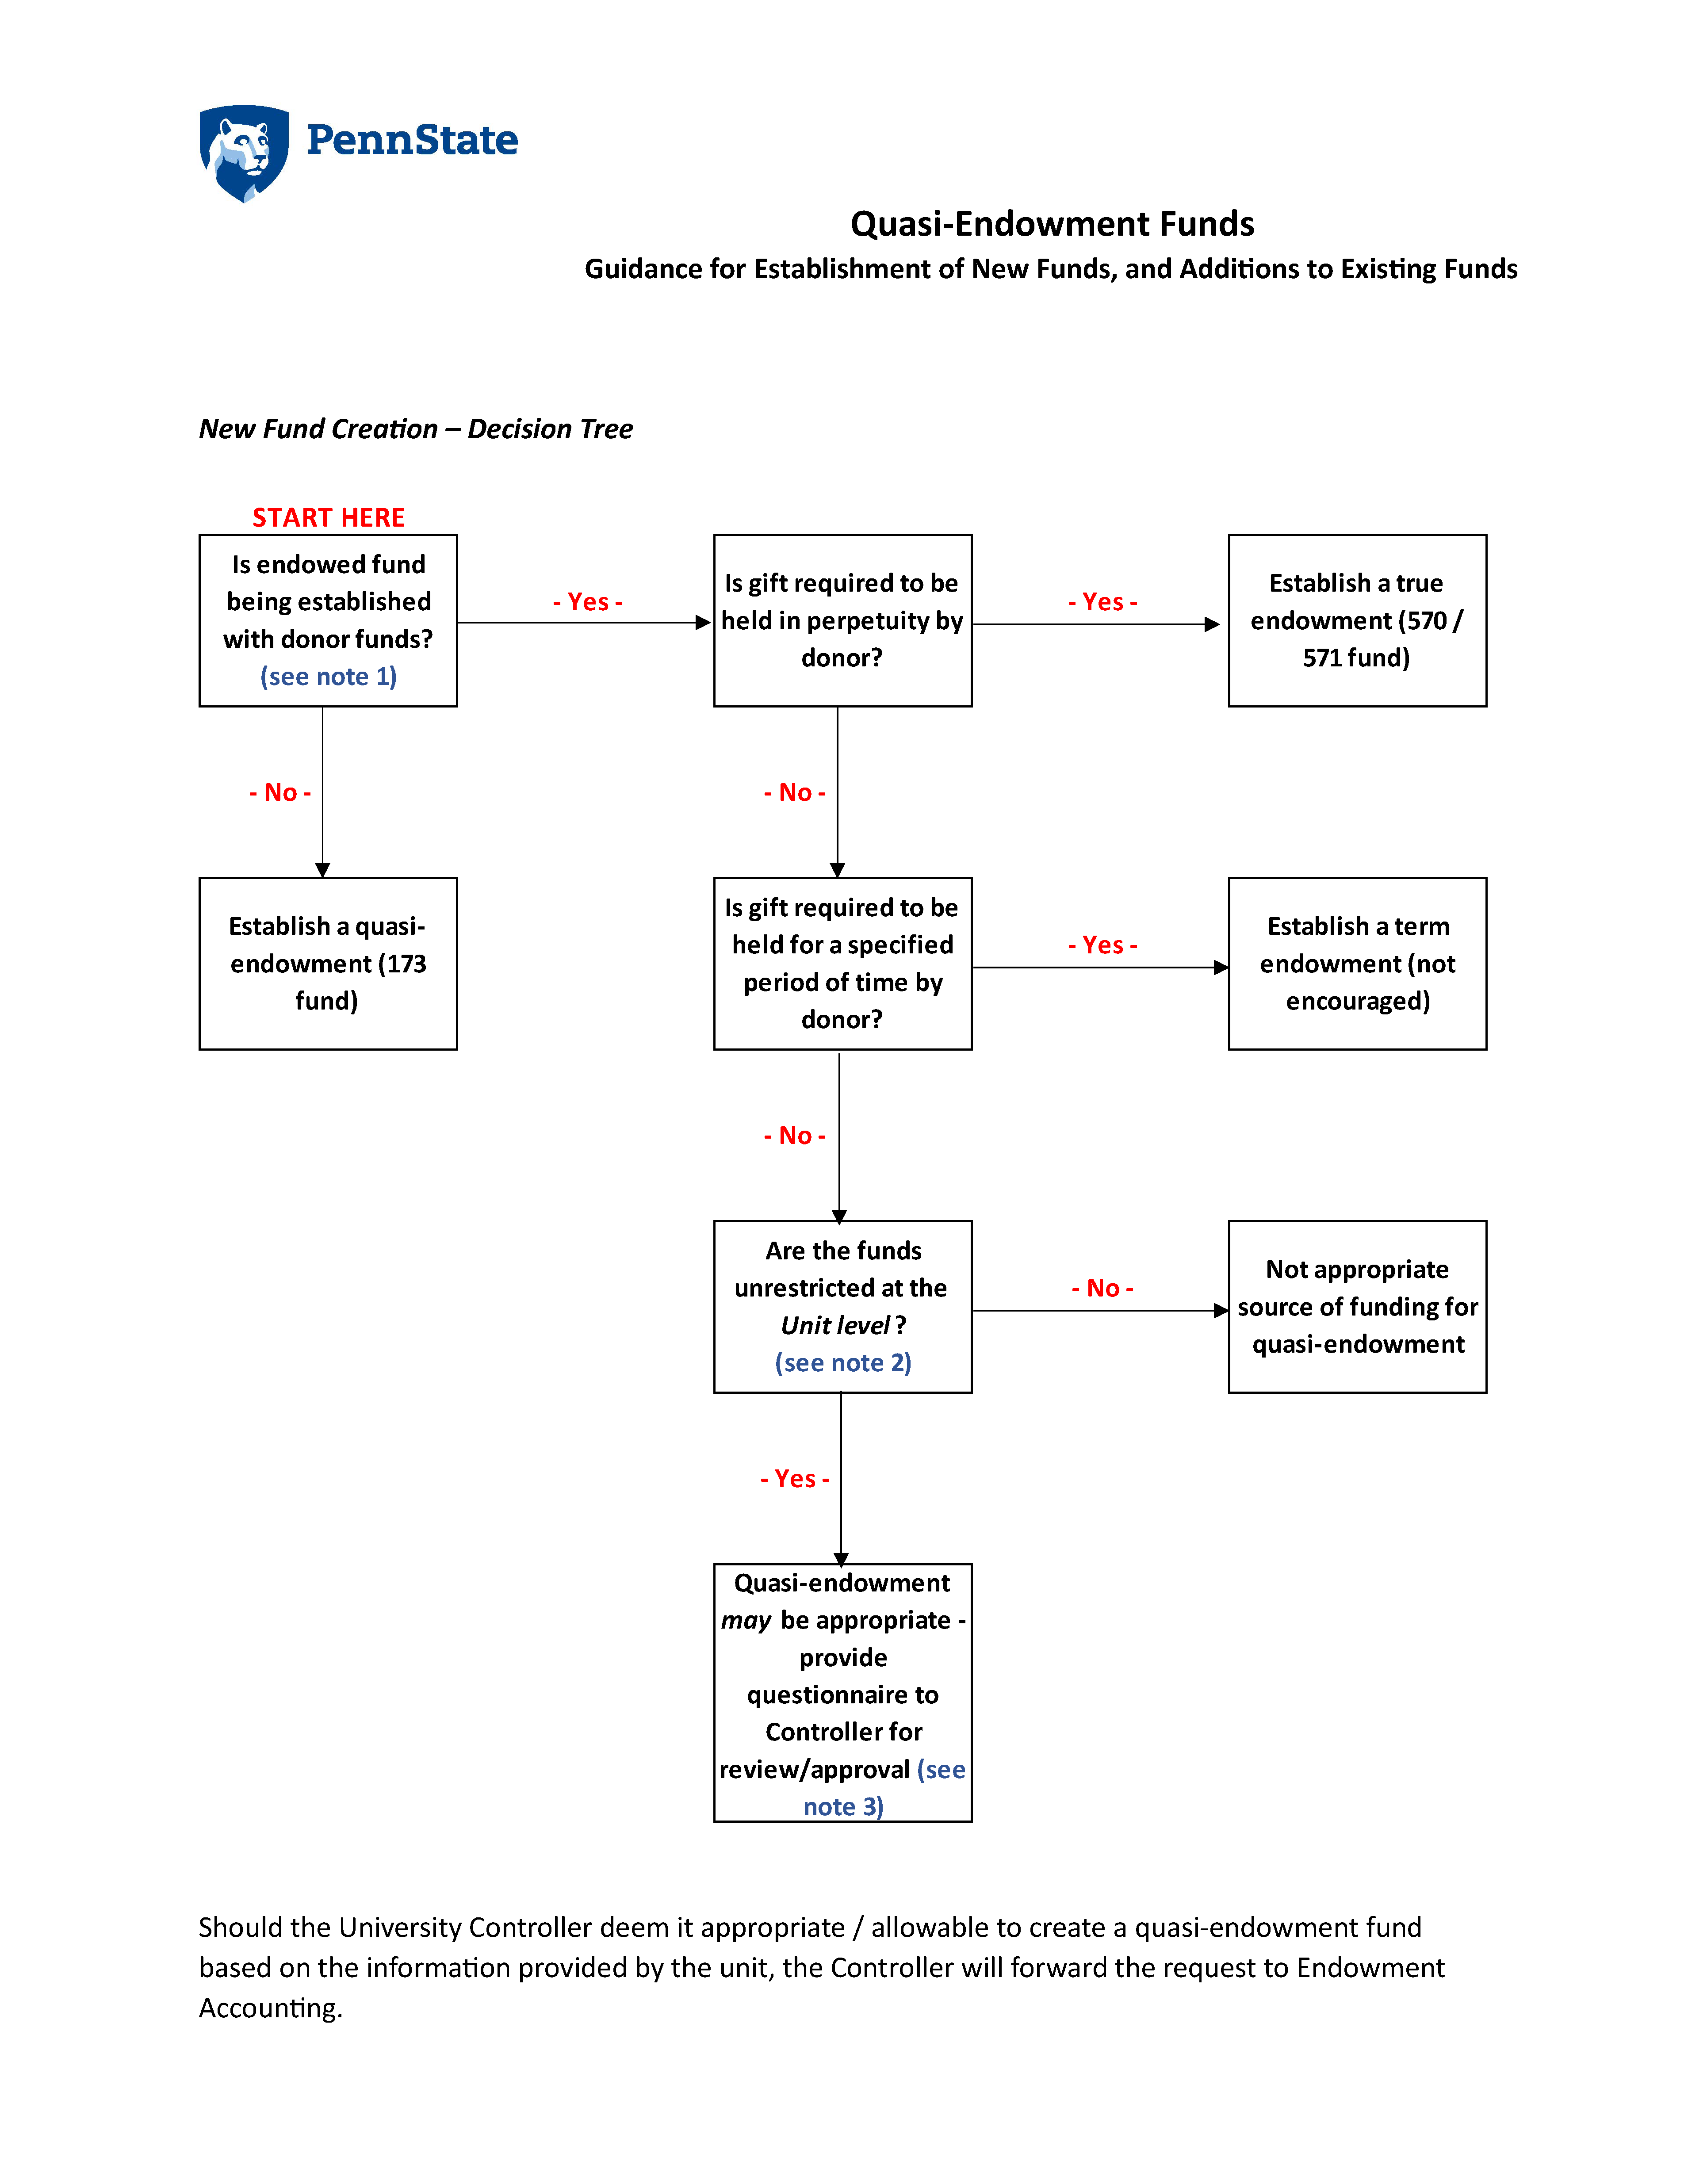 Image of Page 1 of the Quasi-Endowment Funds Decision Tool